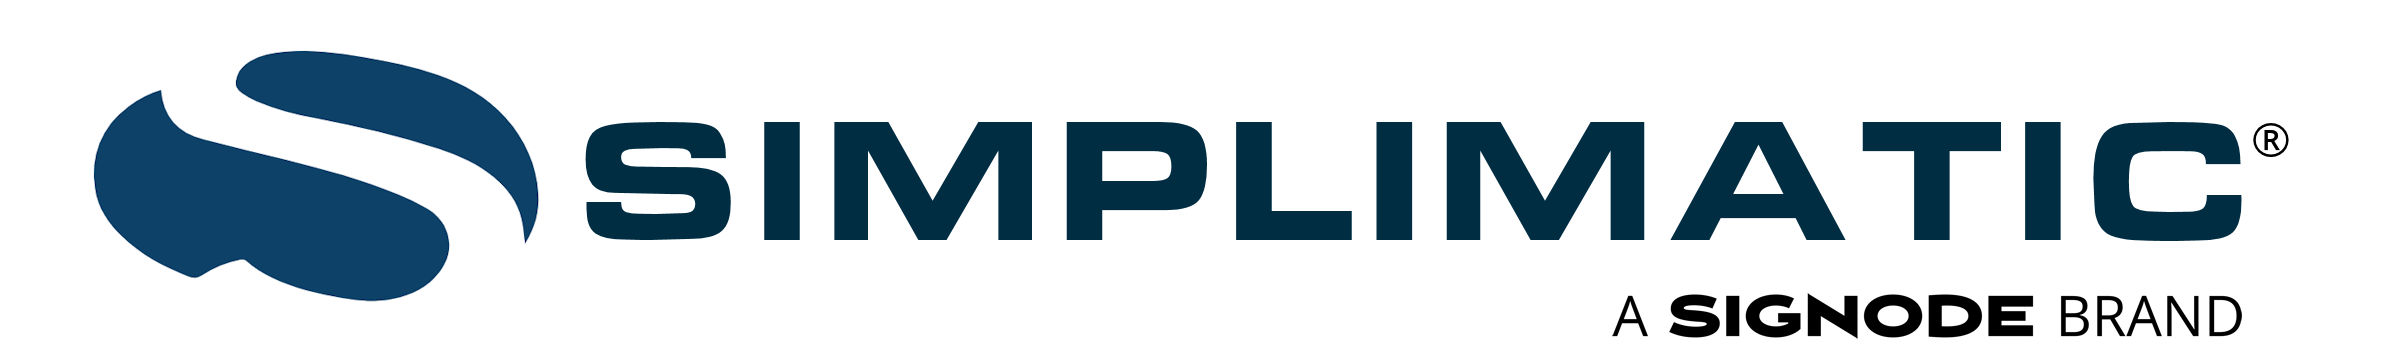 simplimatic_logo_with_trademark (1) (3).png